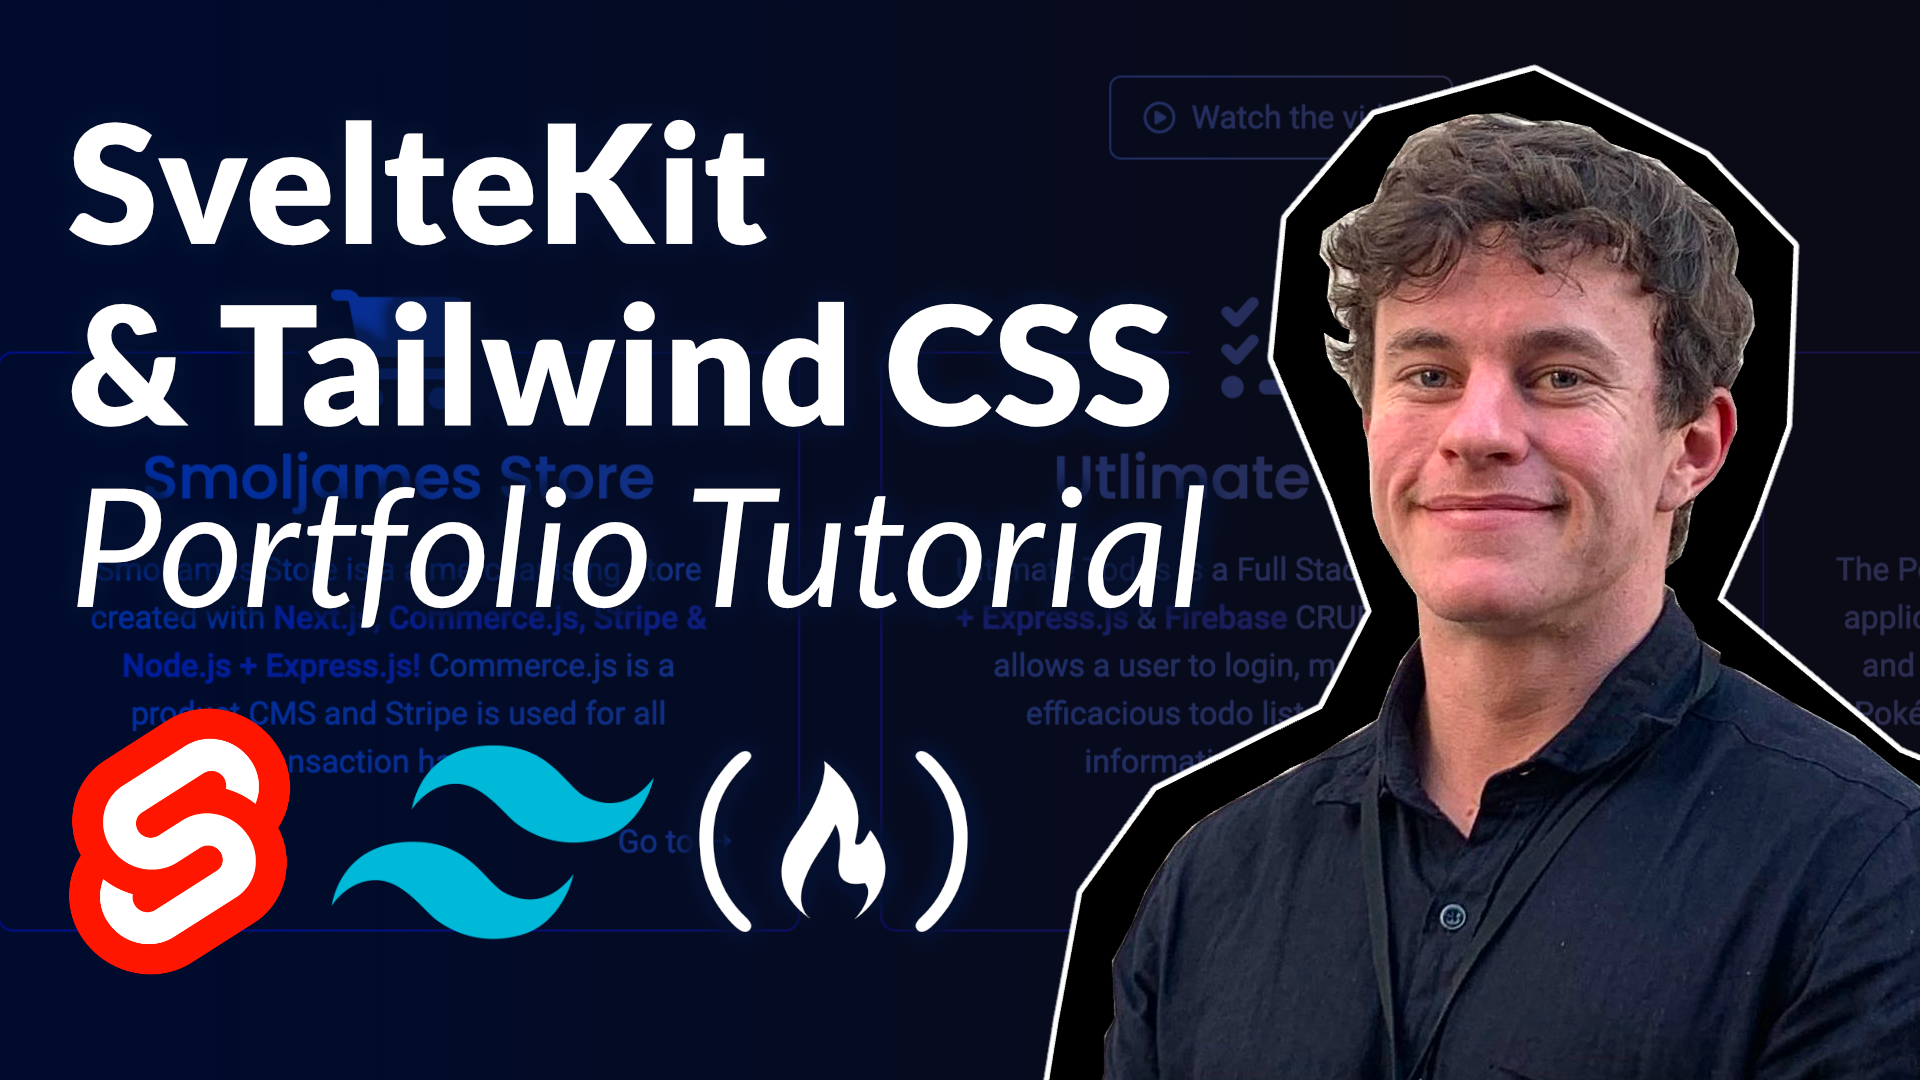 Image for Learn SvelteKit and Tailwind CSS by Building a Web Portfolio